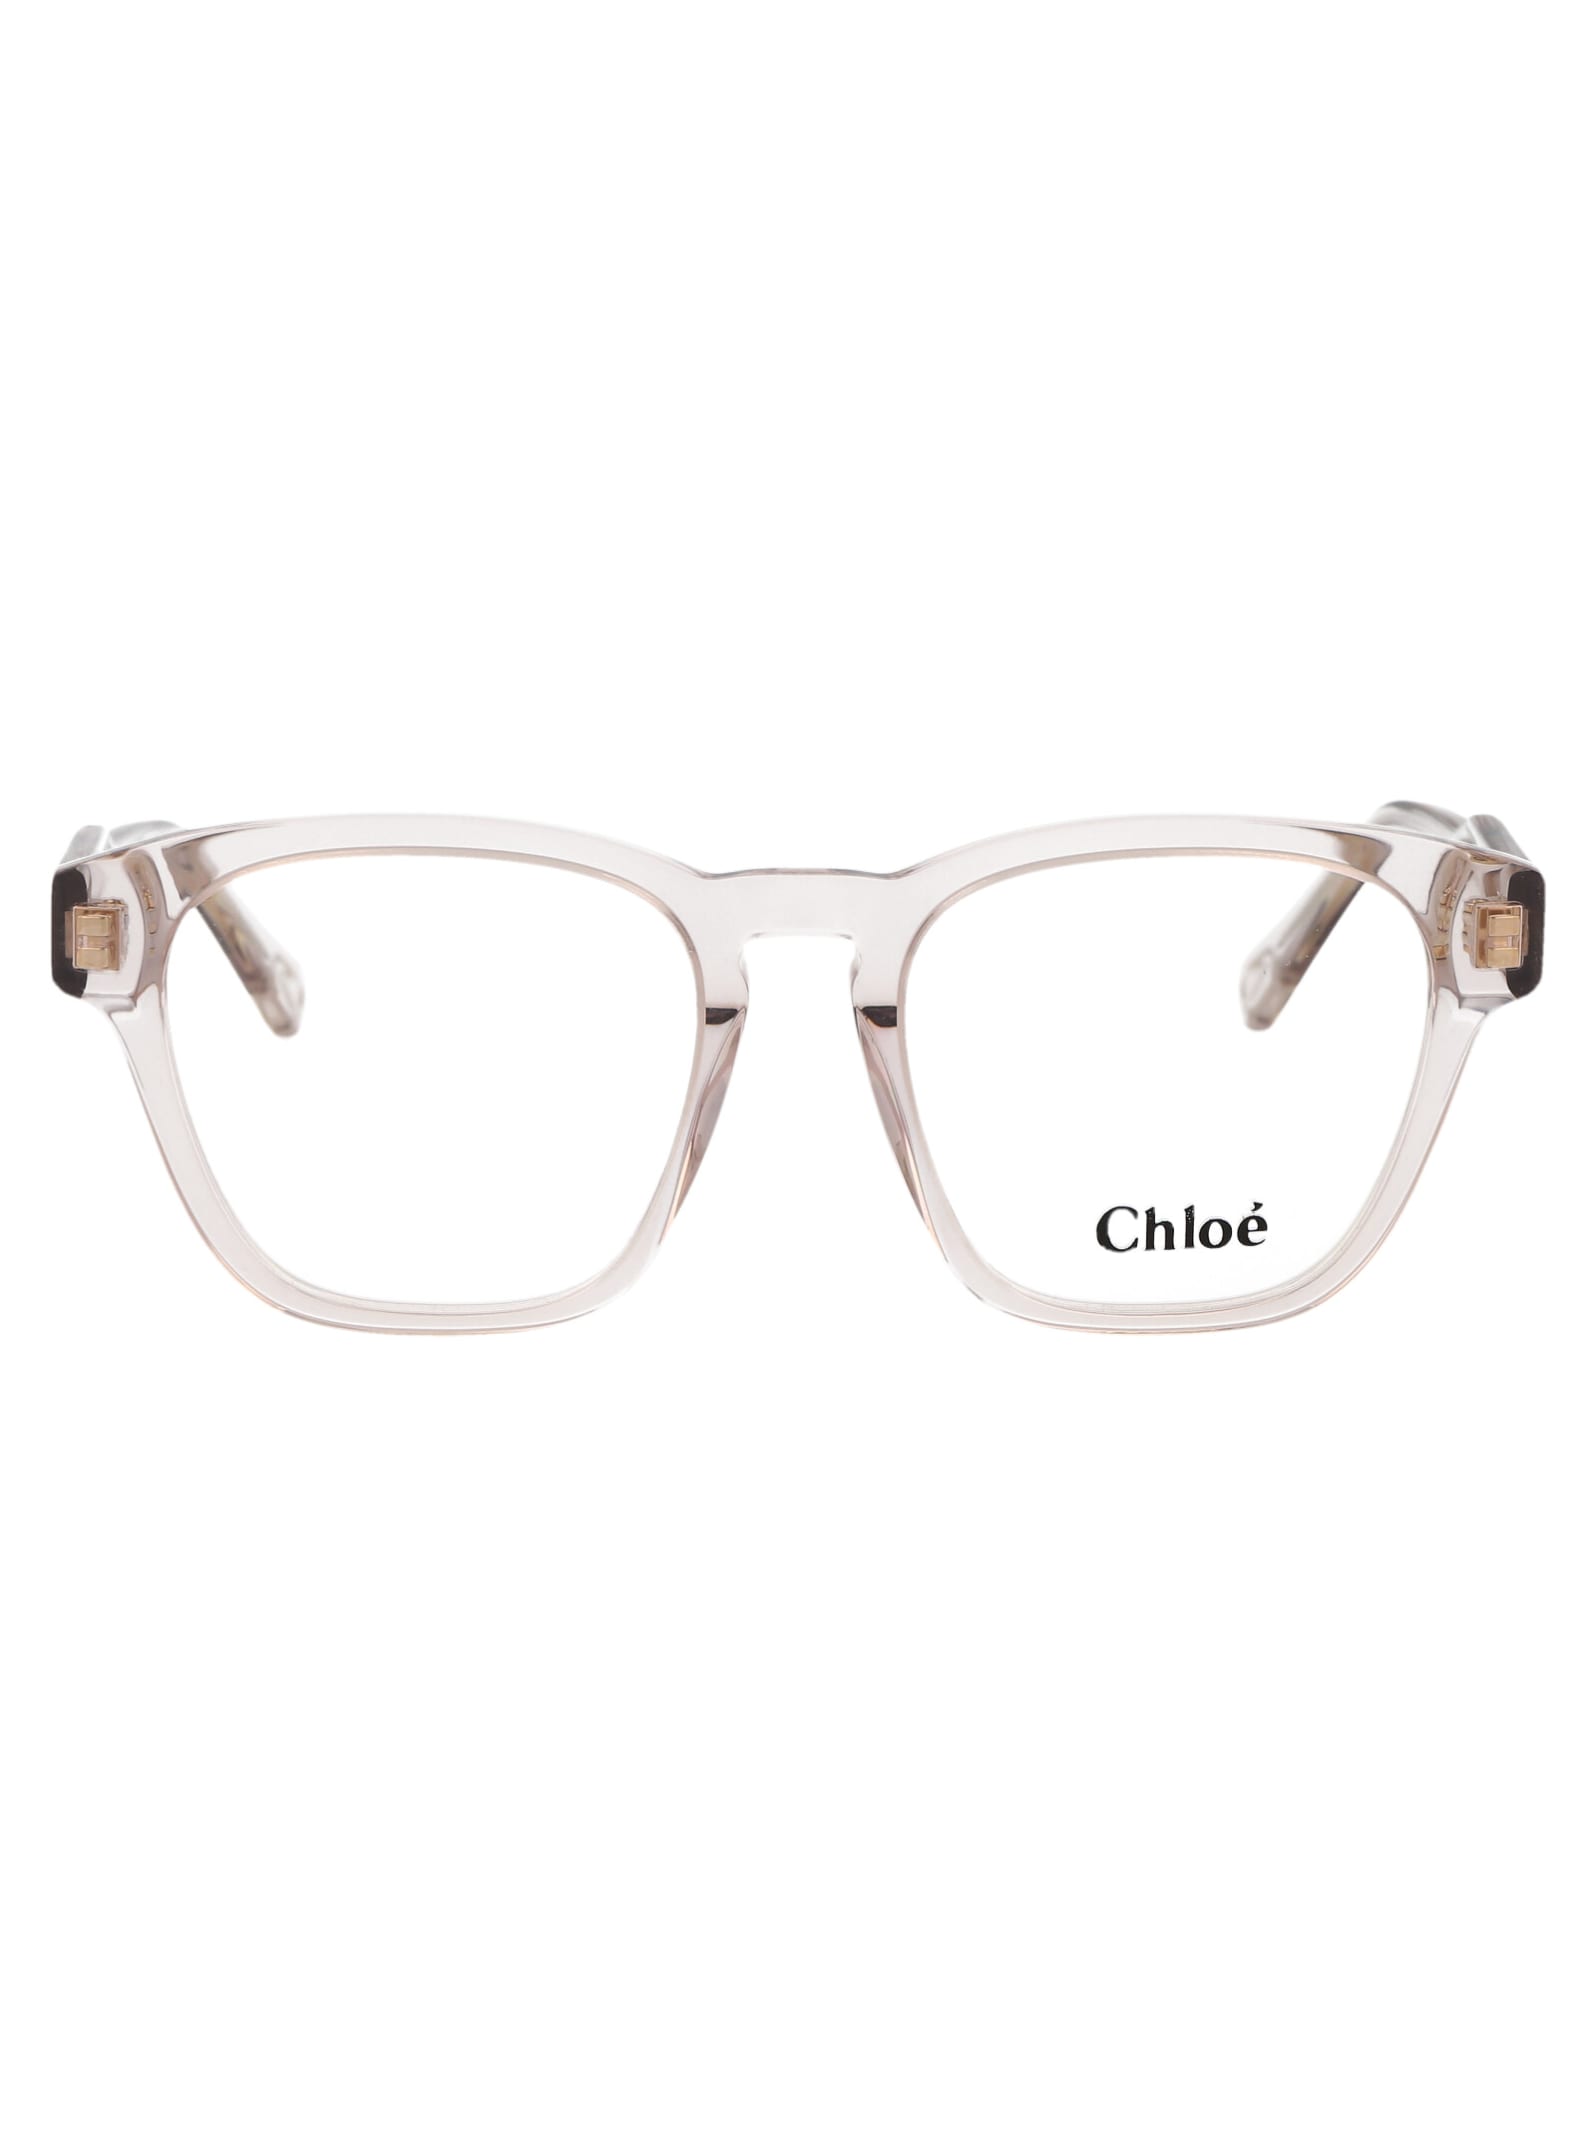 Chloé Ch0161o Glasses In 005 Nude Nude Transparent